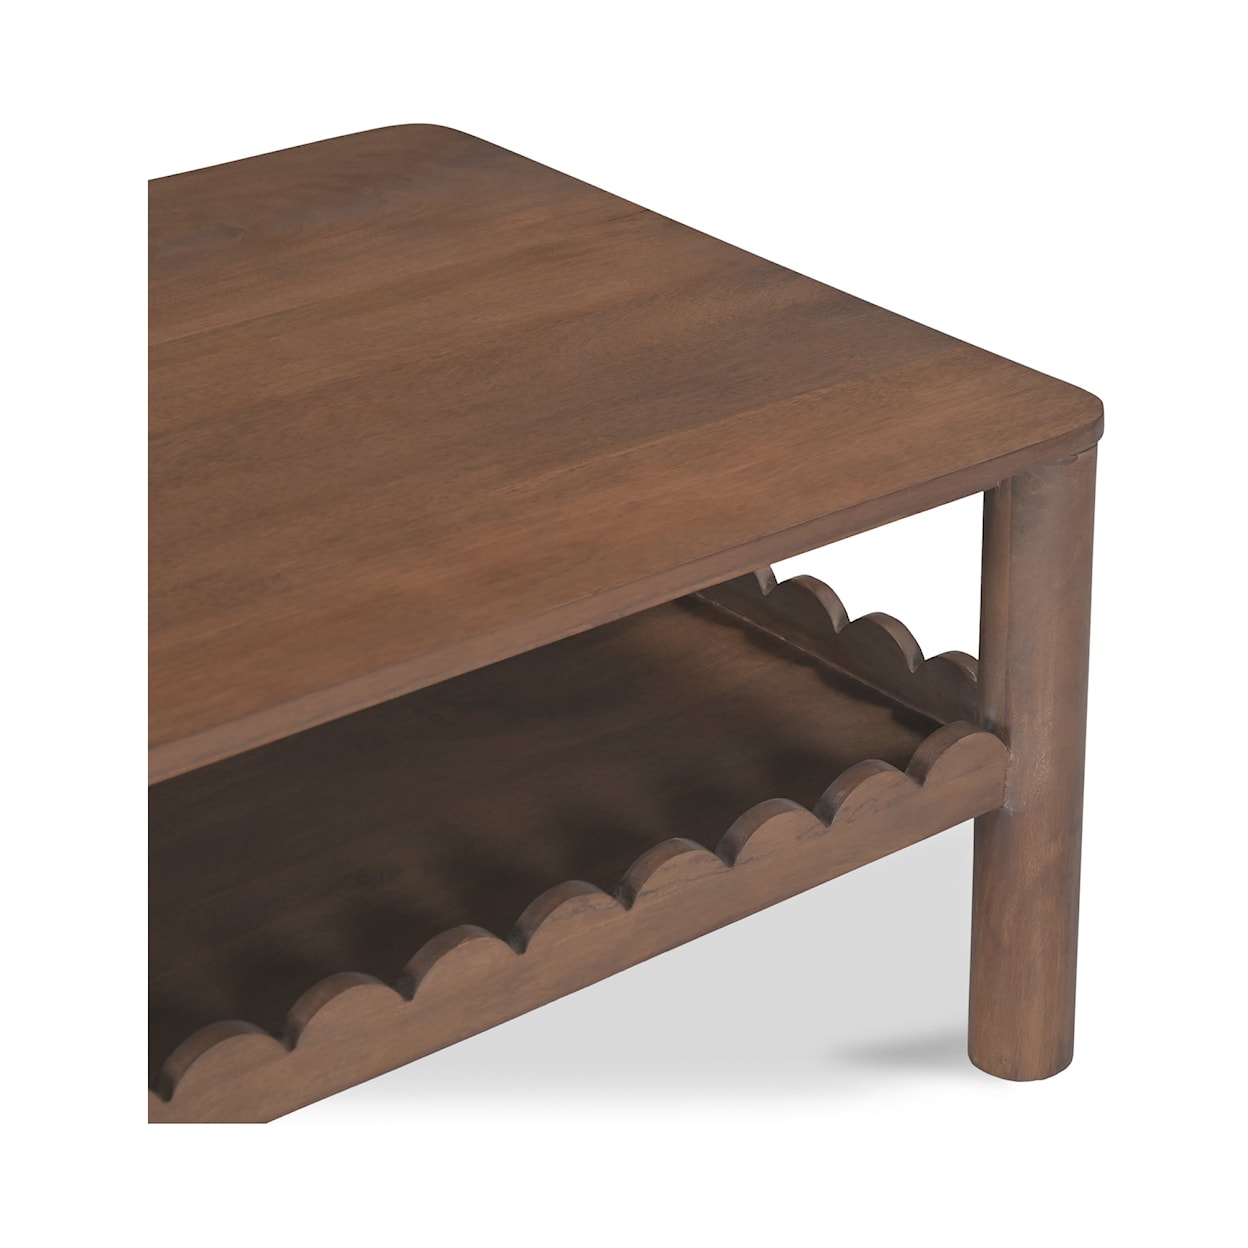 Moe's Home Collection Wiley Coffee Table